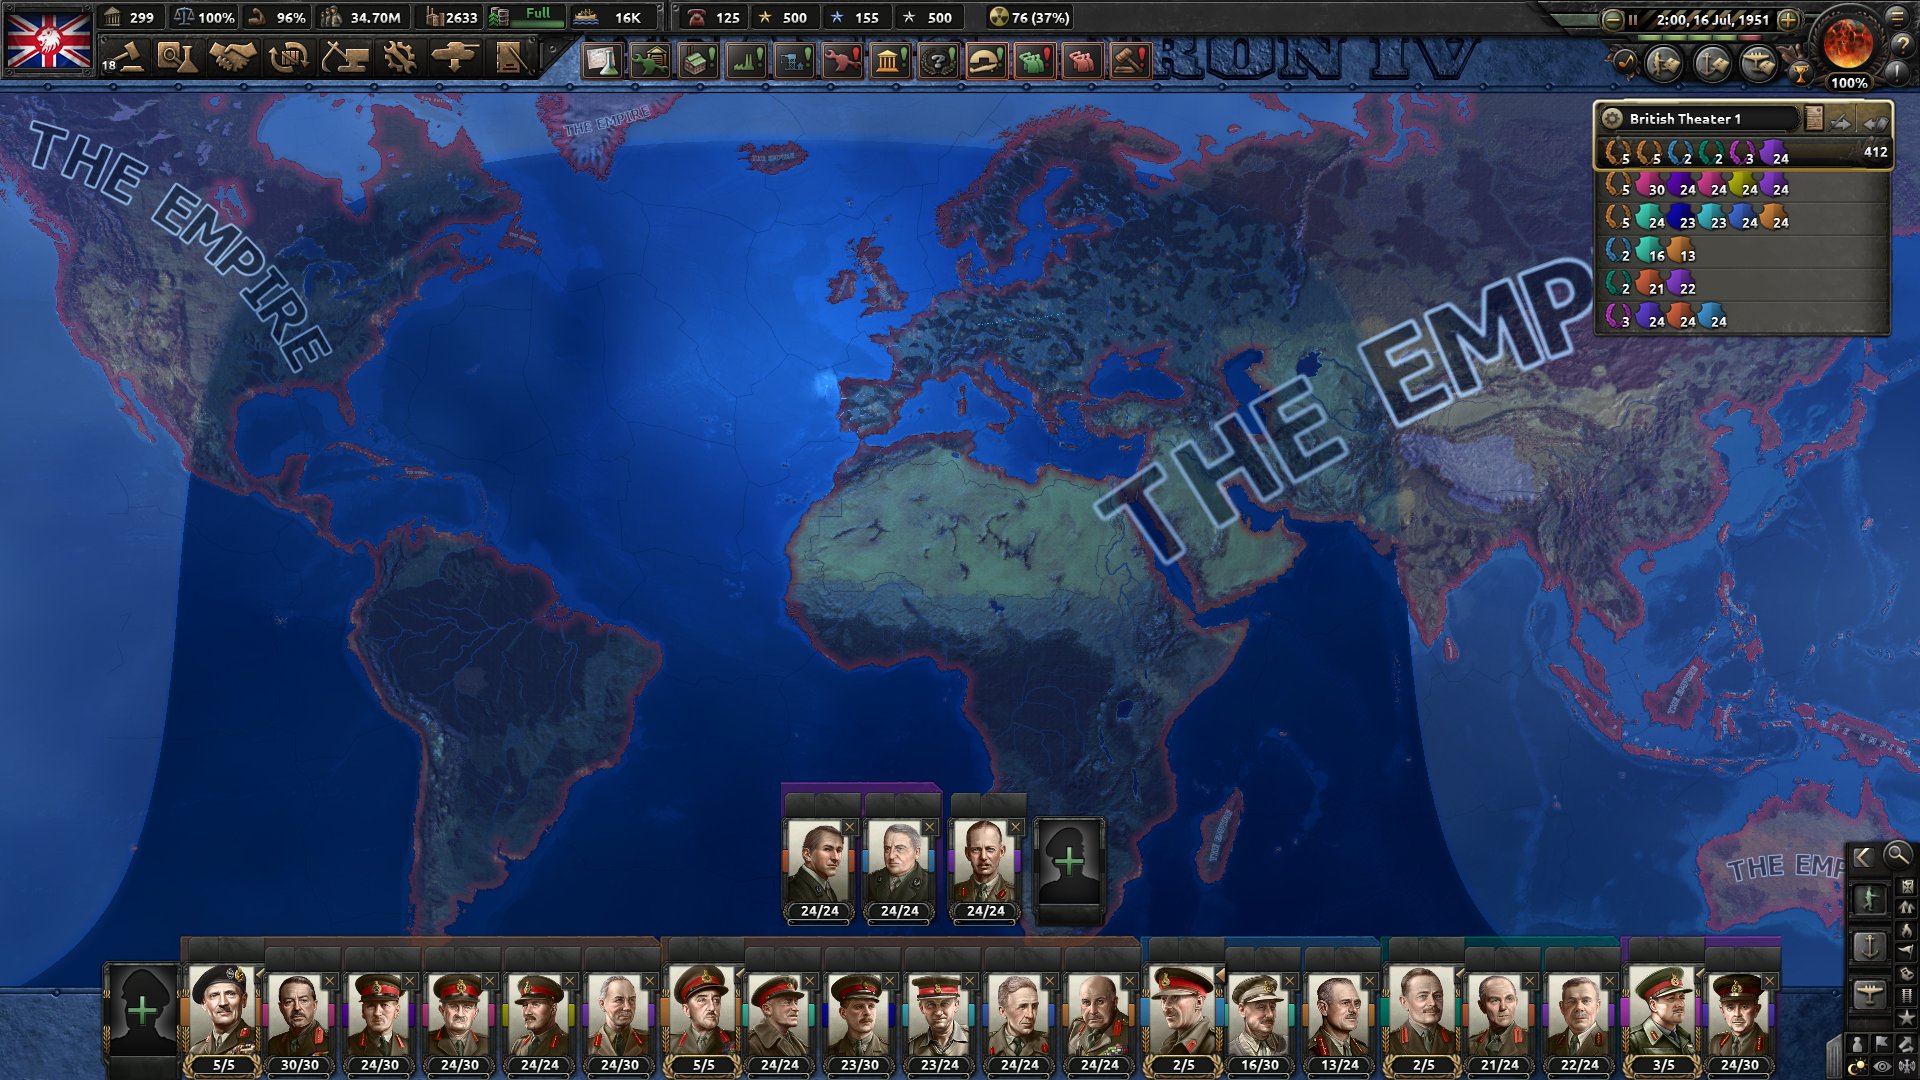 AlfonsoB18 on Twitter: "The sun never sets on the British Empire #hoi4 https://t.co/2...